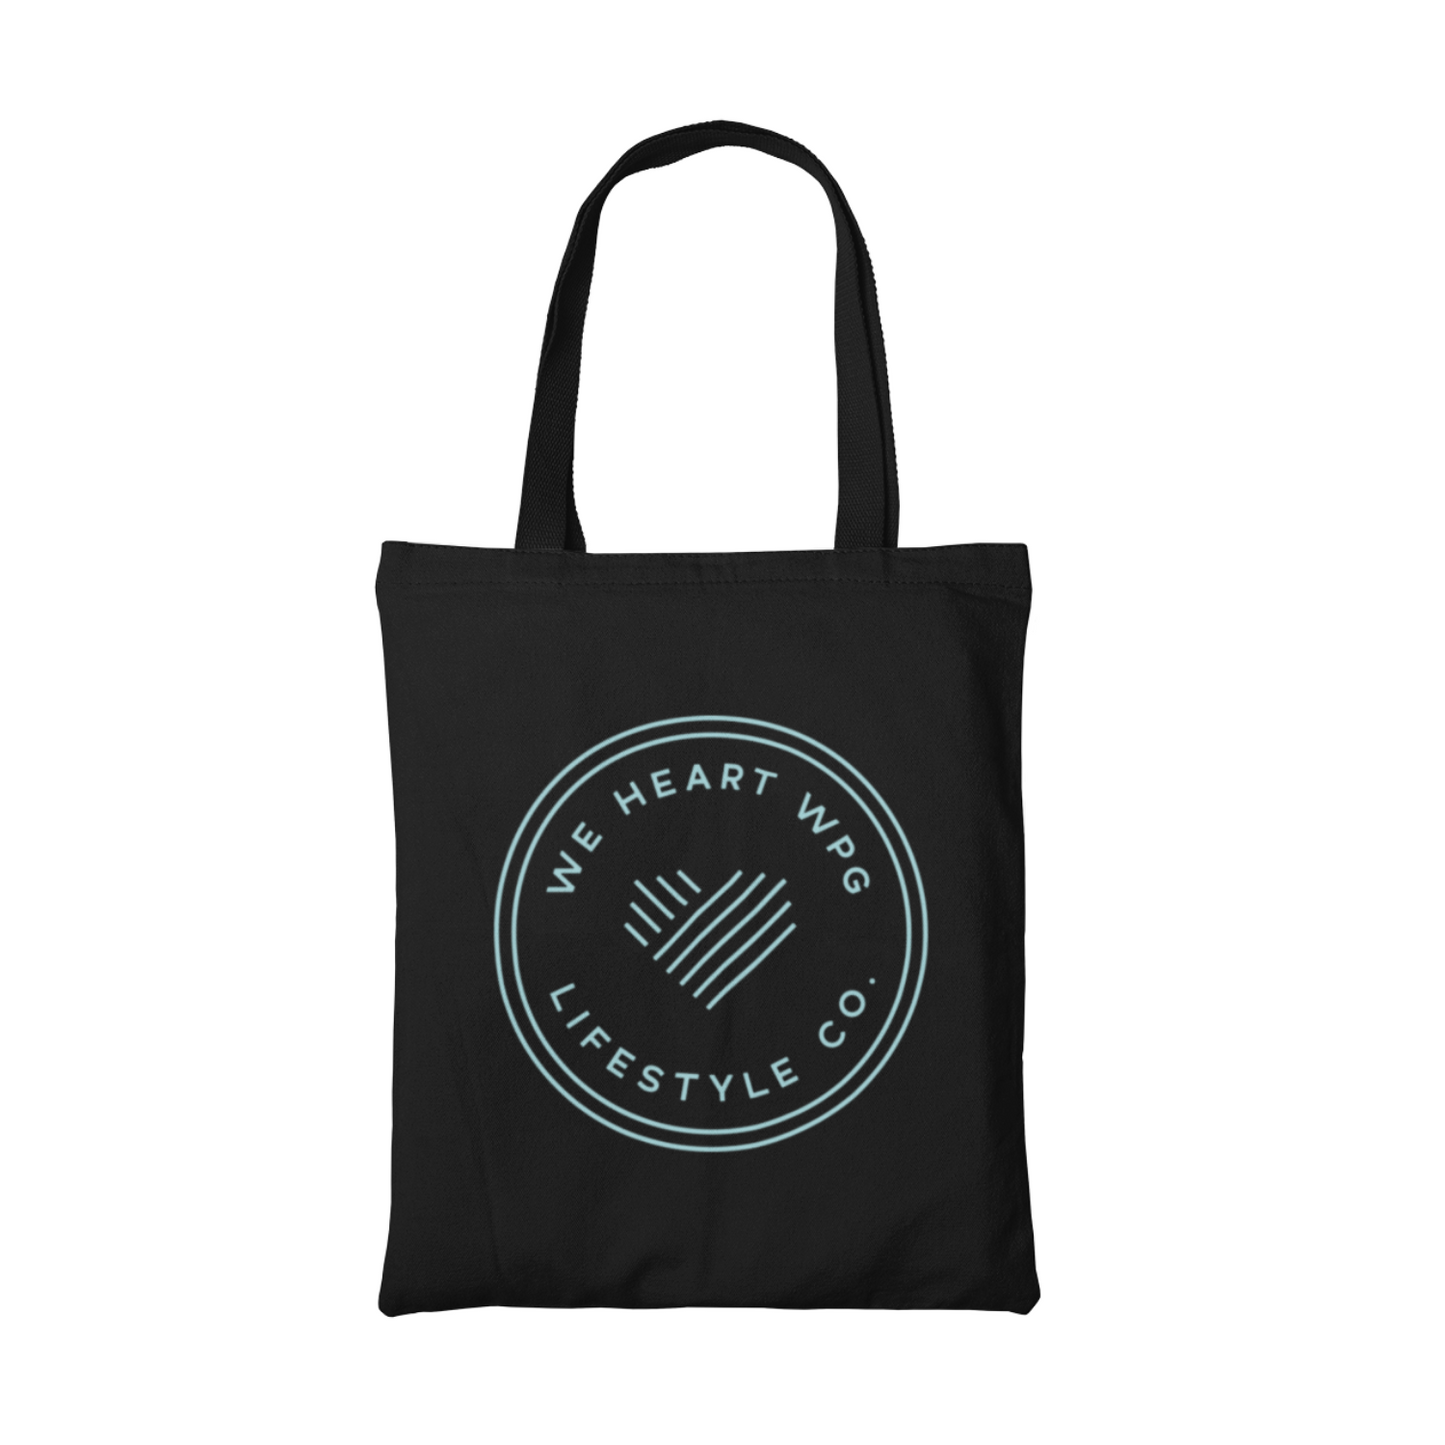 WHW Lifestyle Tote | Teal on Black